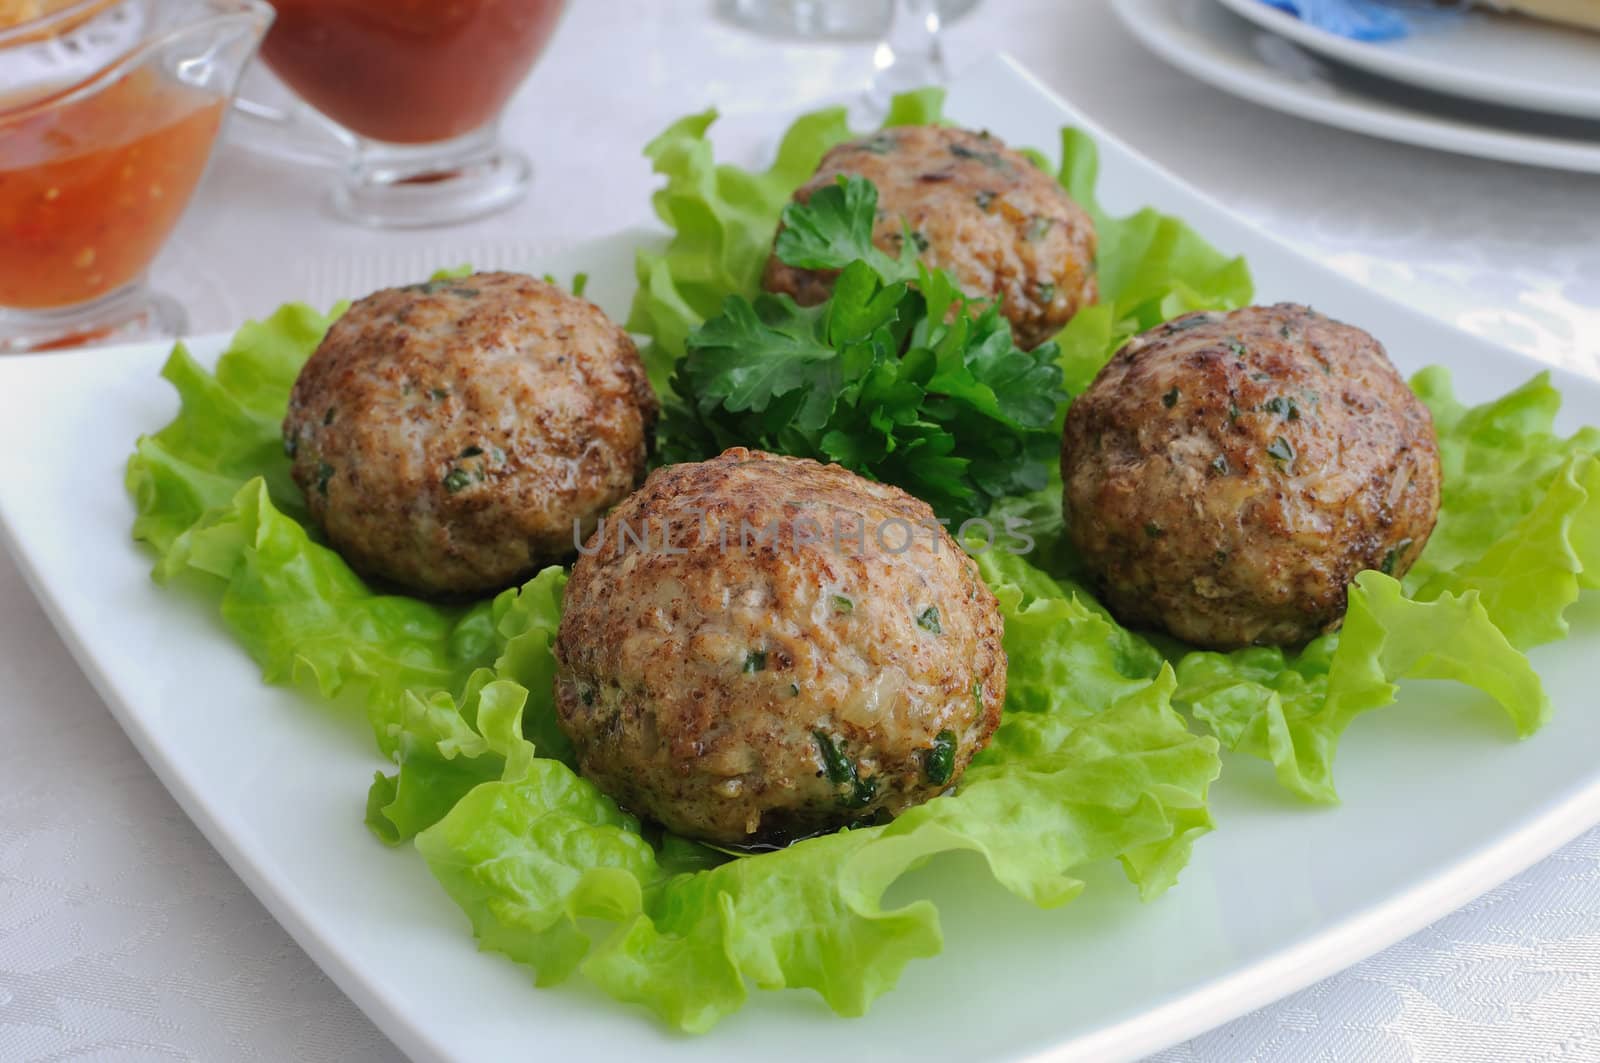  Meatballs with greens on salad leaves closeup